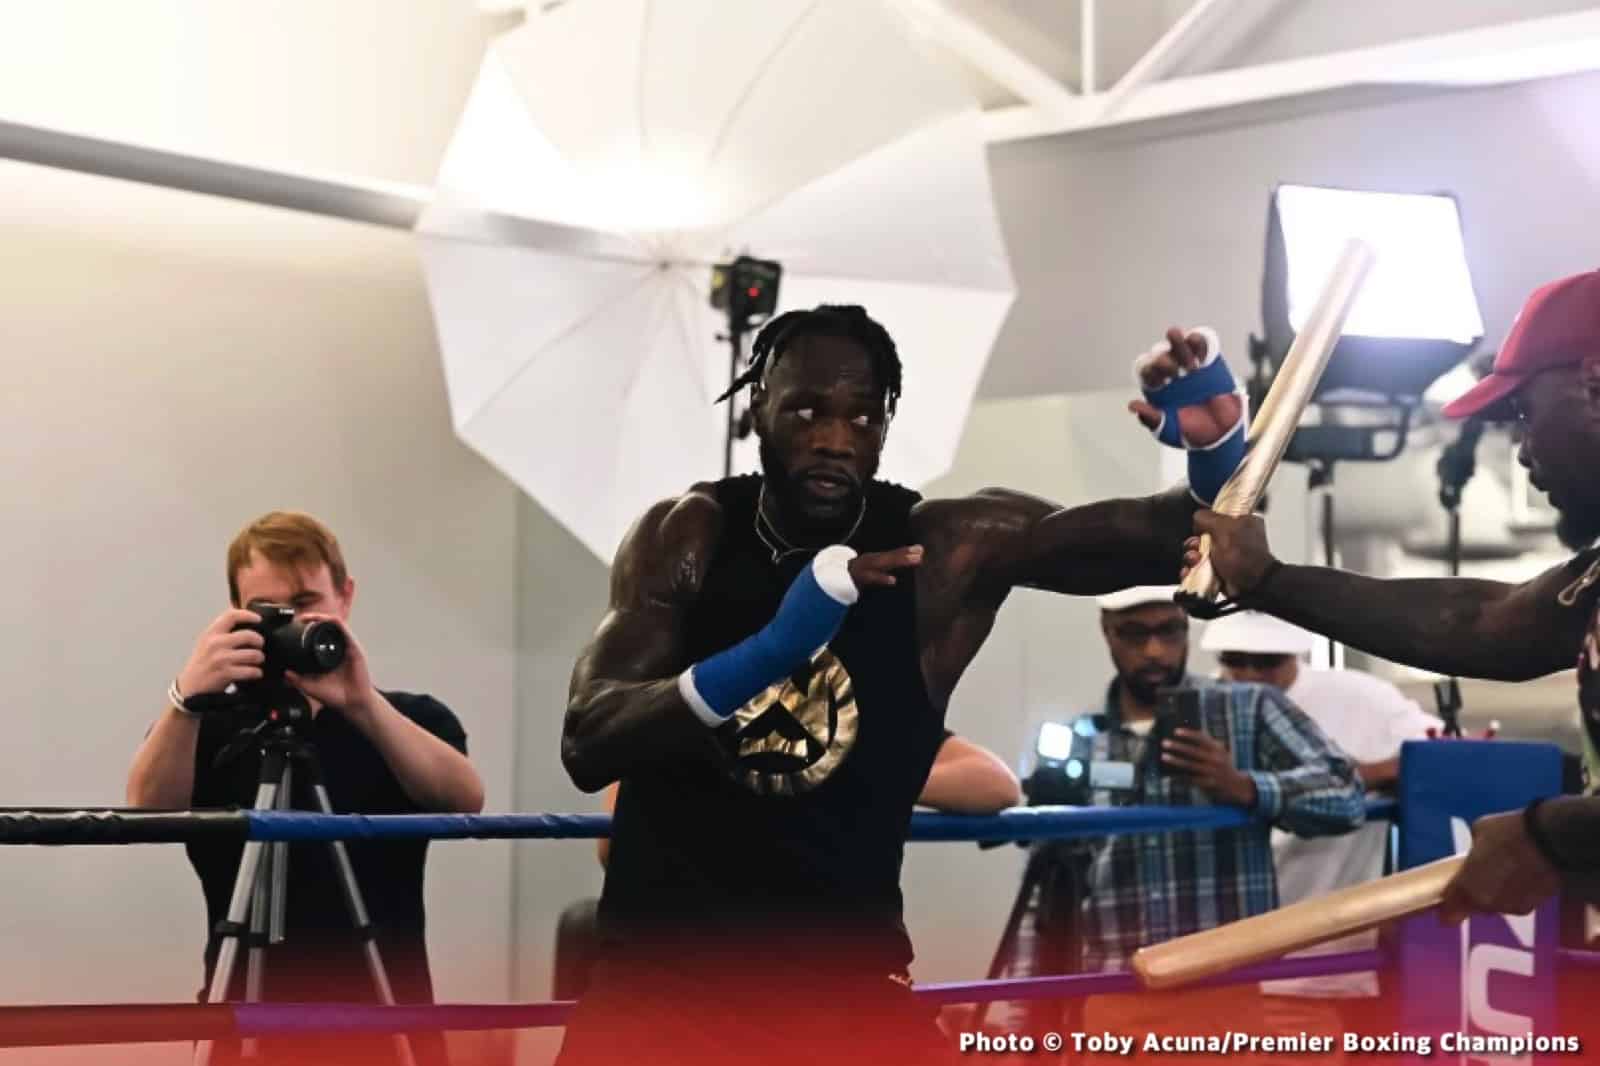 Deontay Wilder says he'll weigh in 220s for Robert Helenius fight